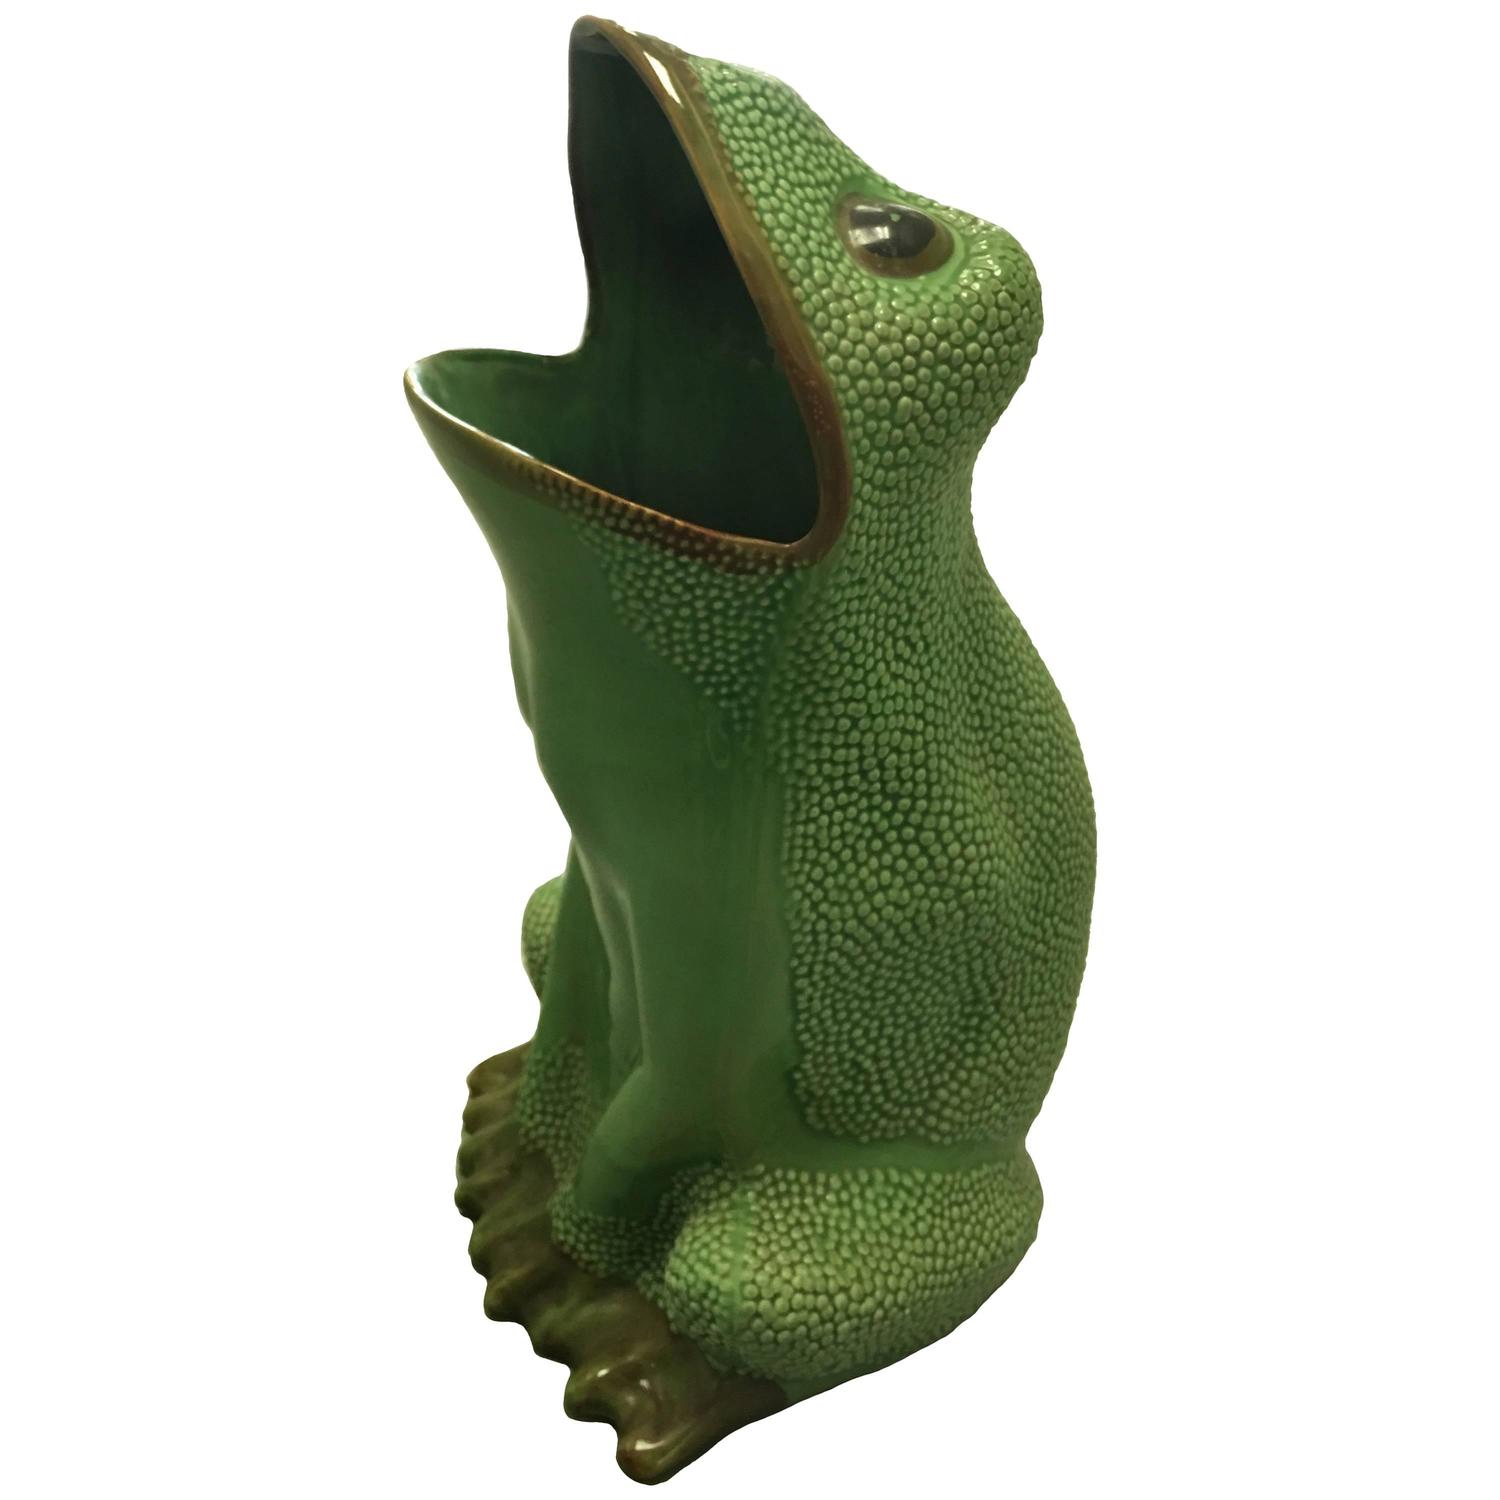 Italian Green Frog Umbrella Stand by Gumps For Sale at 1stdibs